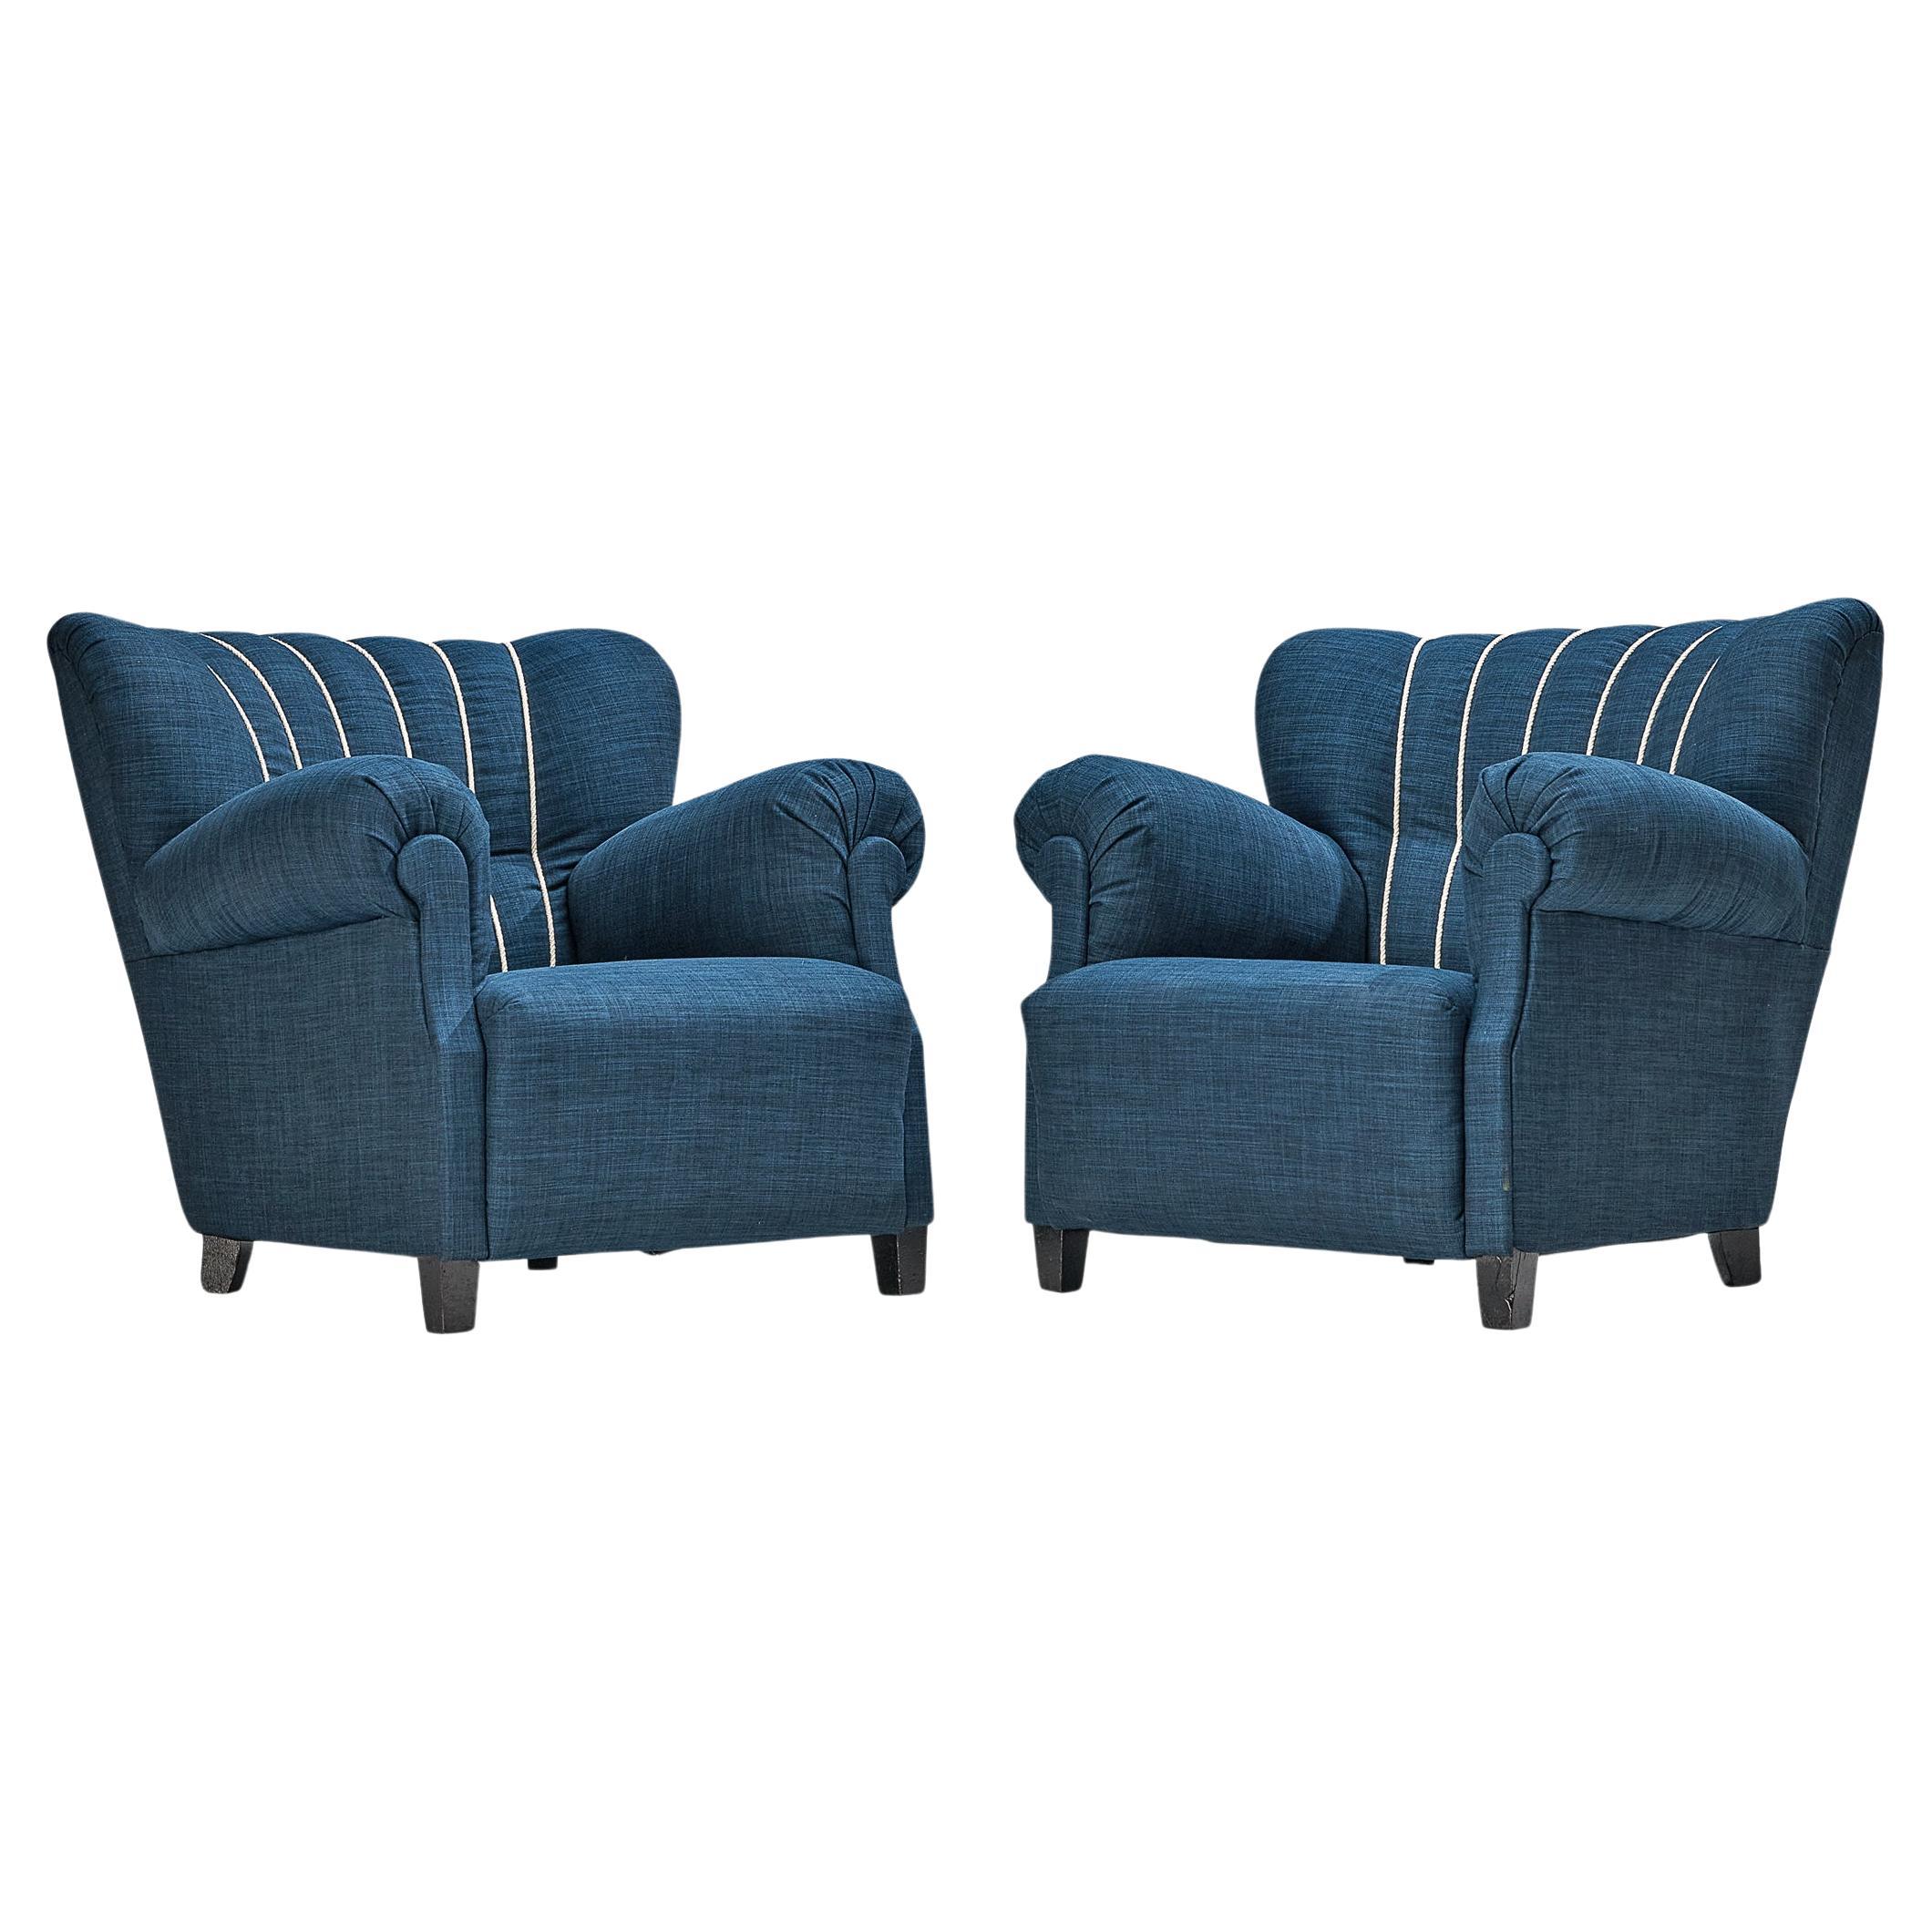 Pair of Art Deco Lounge Chairs in Blue Upholstery